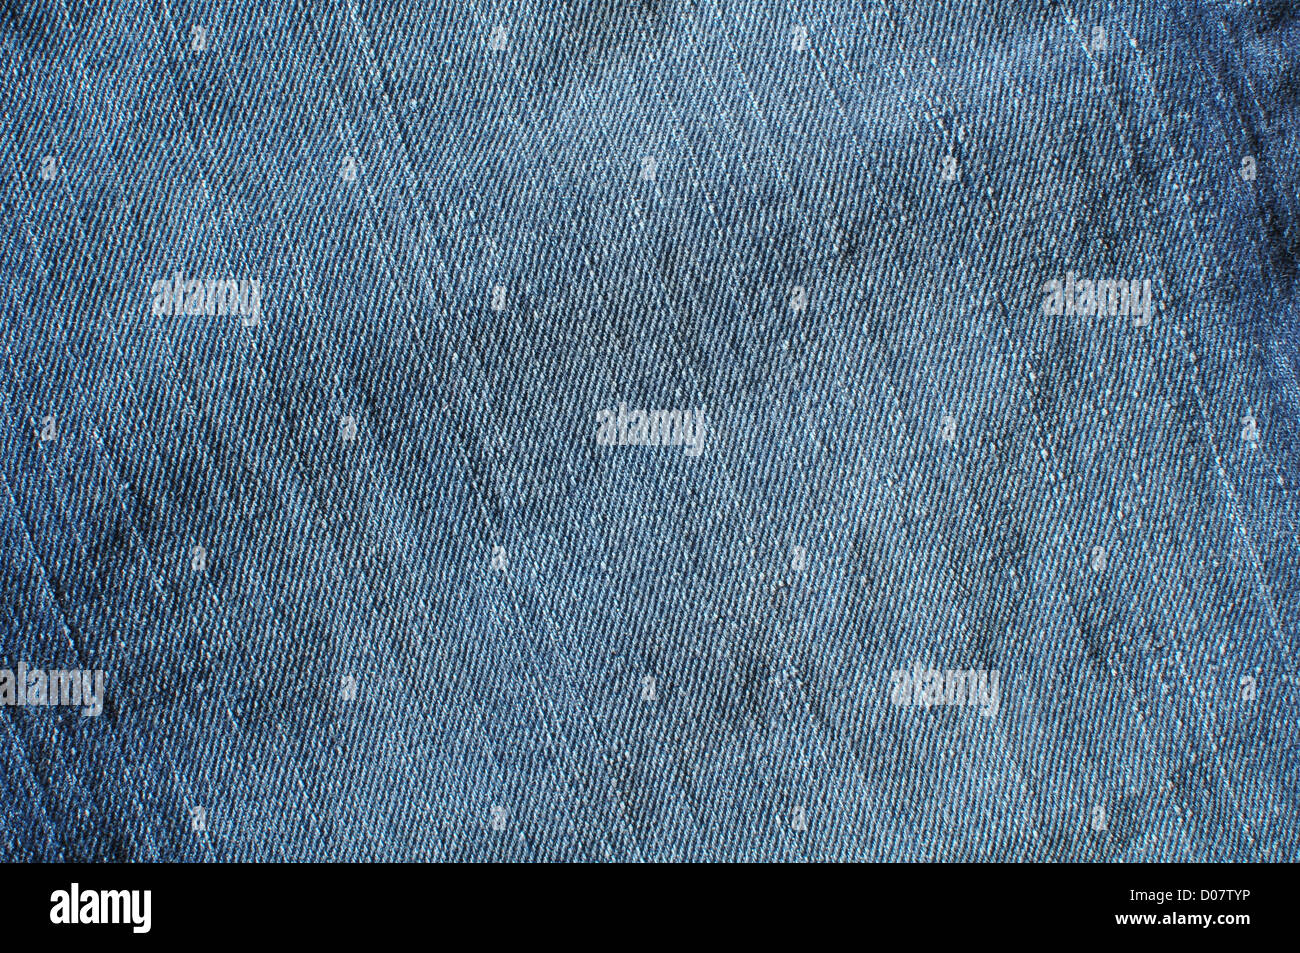 Fabric of different kinds for sewing clothes. Denim, costume, checkered,  blue red fabric for sewing clothes. Textile folded into a pile. Stock Photo